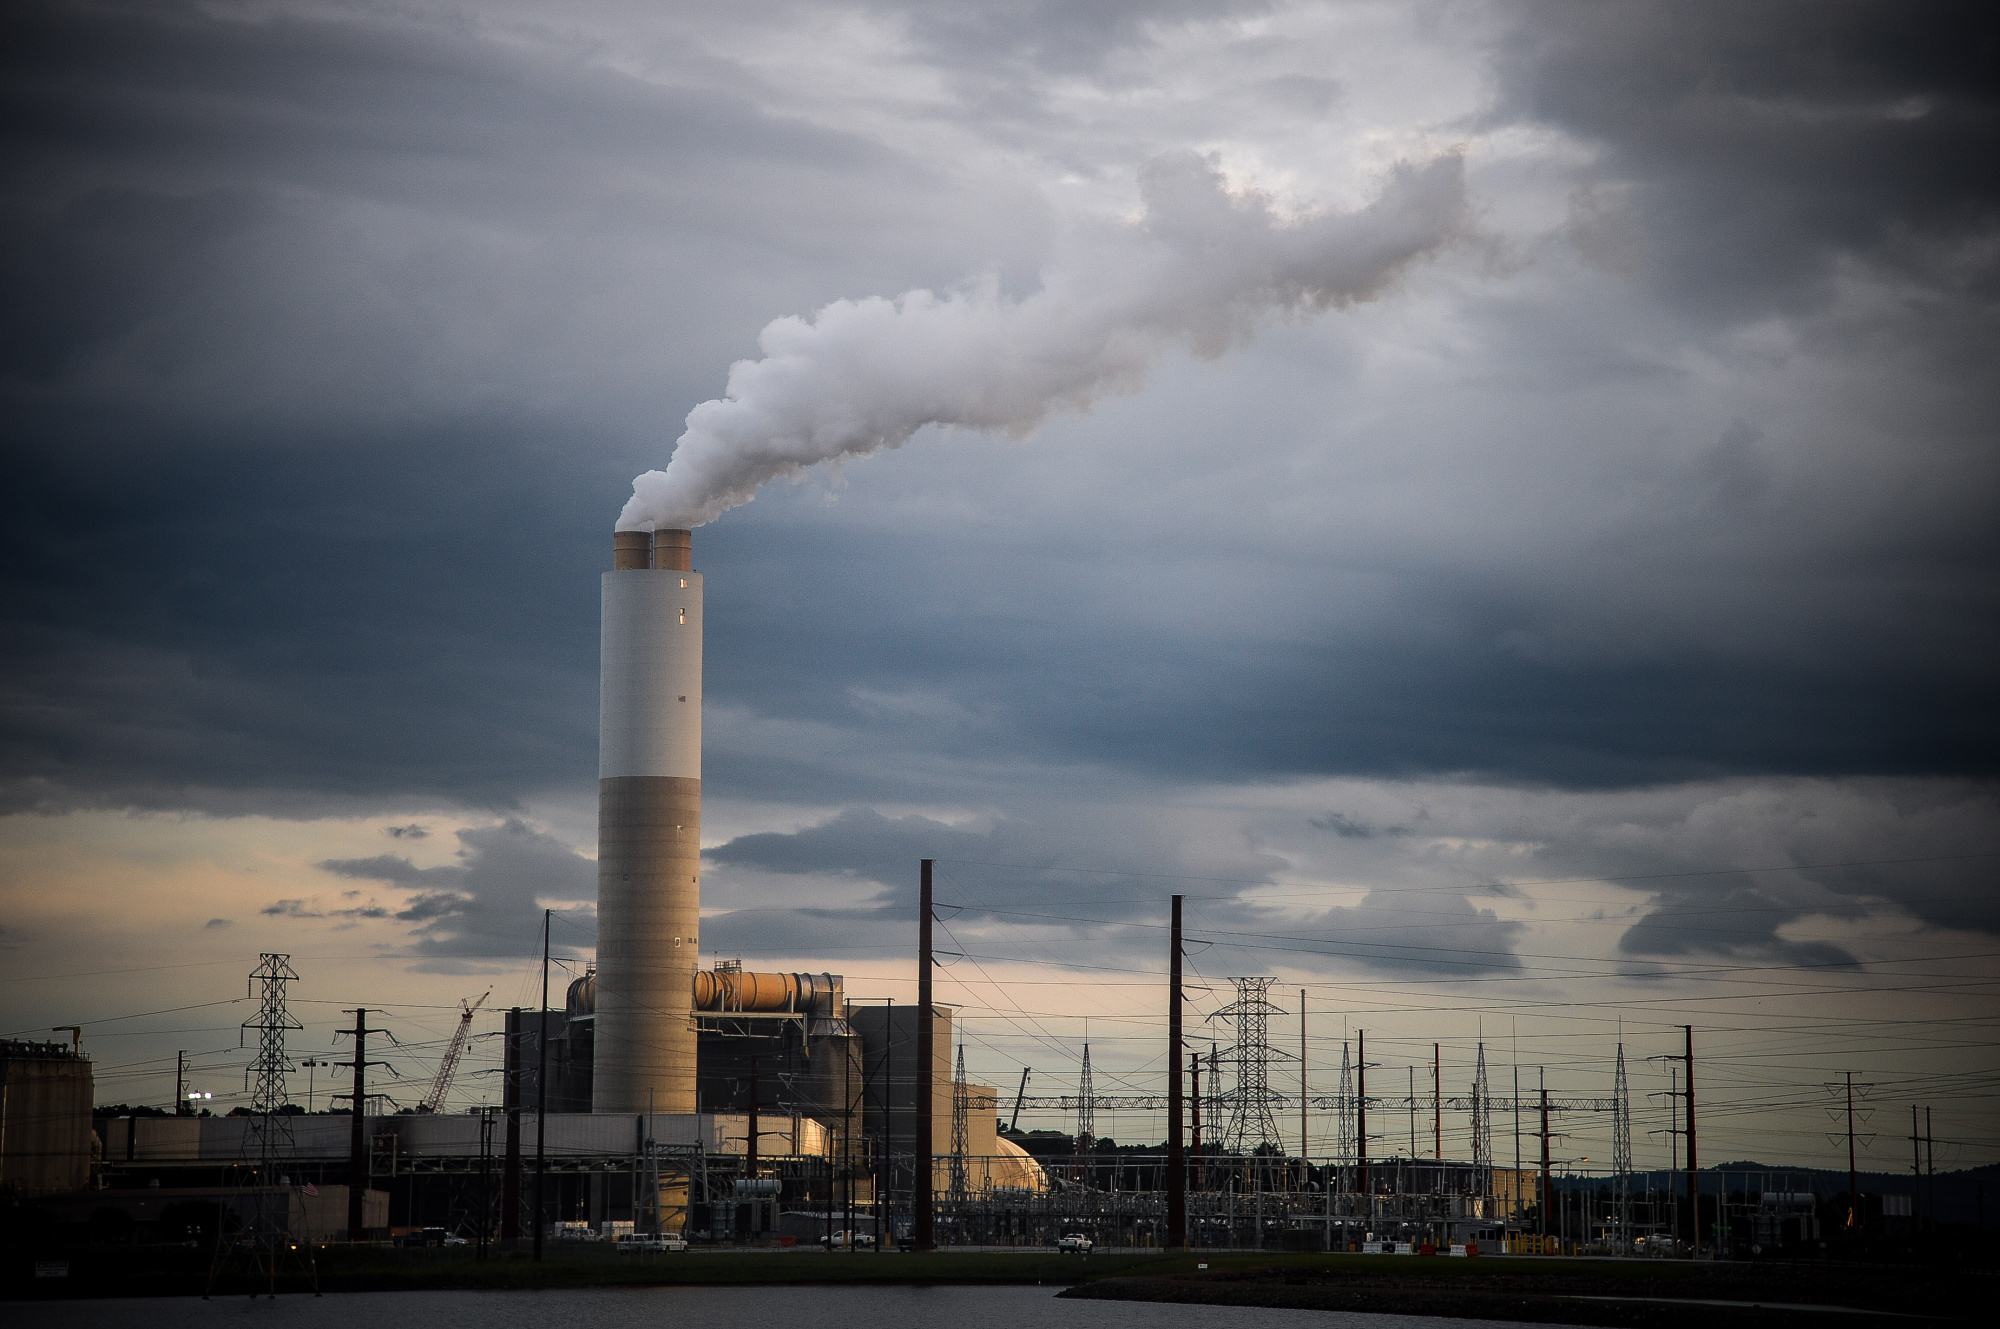 Emissions rise from the Duke Energy Corp. coal-fired Asheville Power Plant ahead of Hurricane Florence in Arden, North Carolina, U.S., on Thursday, Sept. 13, 2018. Hurricane Florences wrath hit the North Carolina coast, but the full effects of the storm, still centered 100 miles from shore, are yet to come. Photographer: Charles Mostoller/Bloomberg